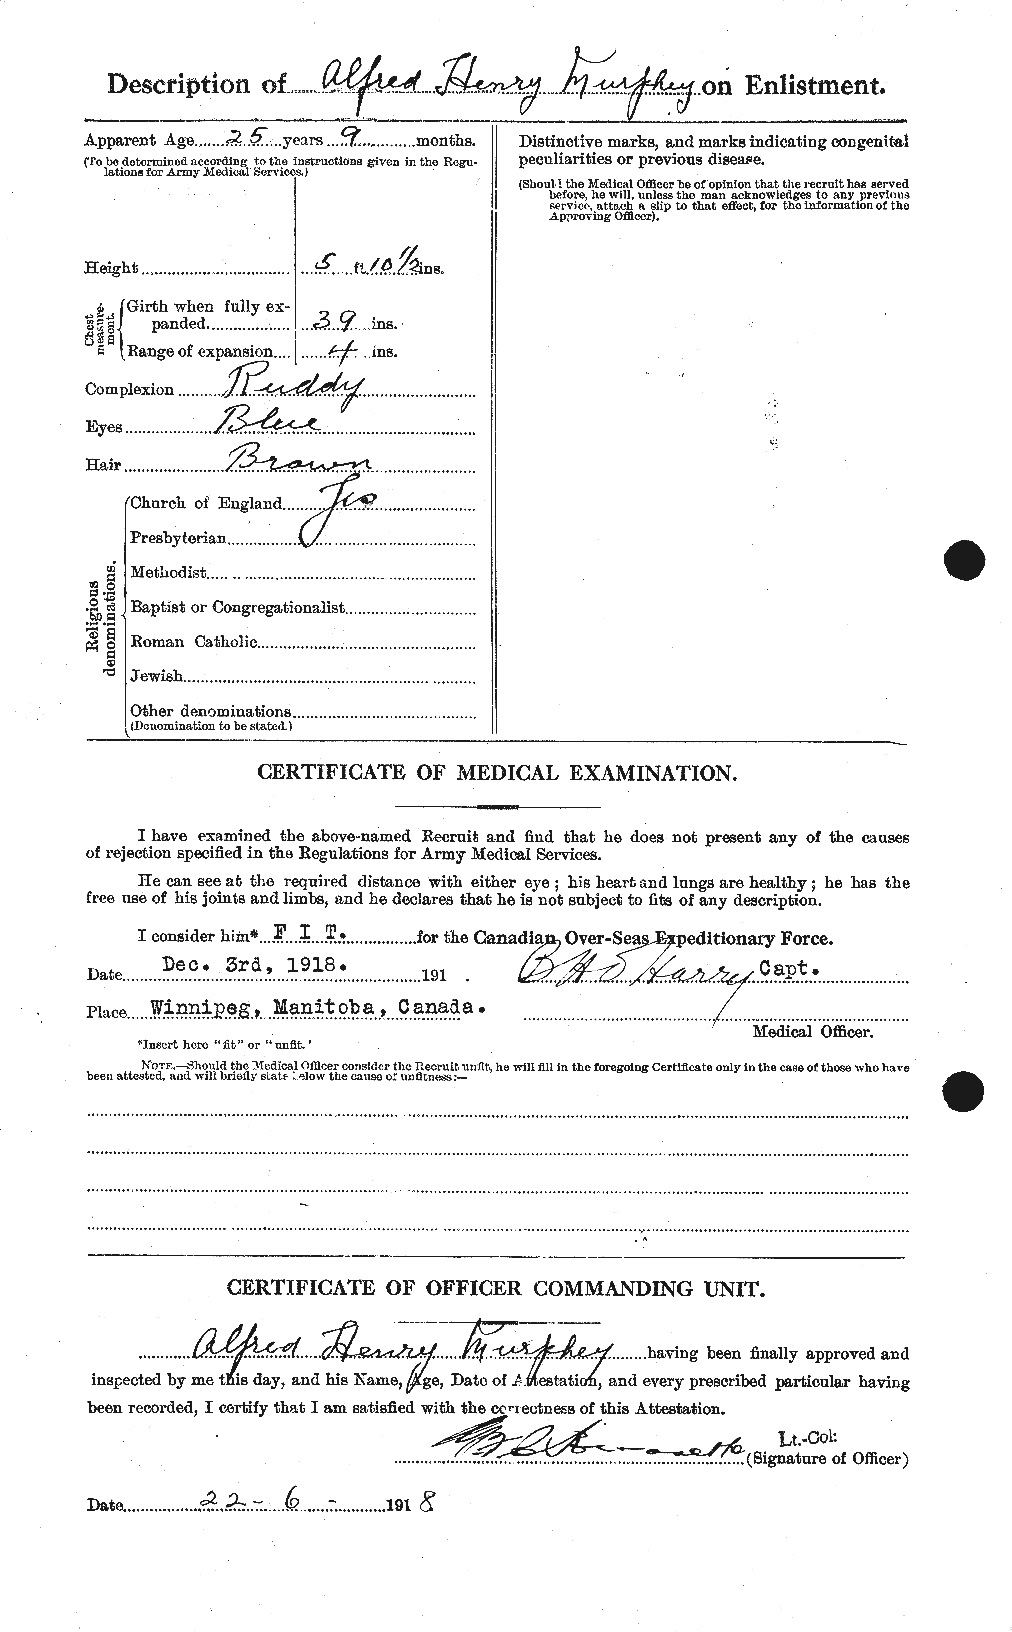 Personnel Records of the First World War - CEF 512649b